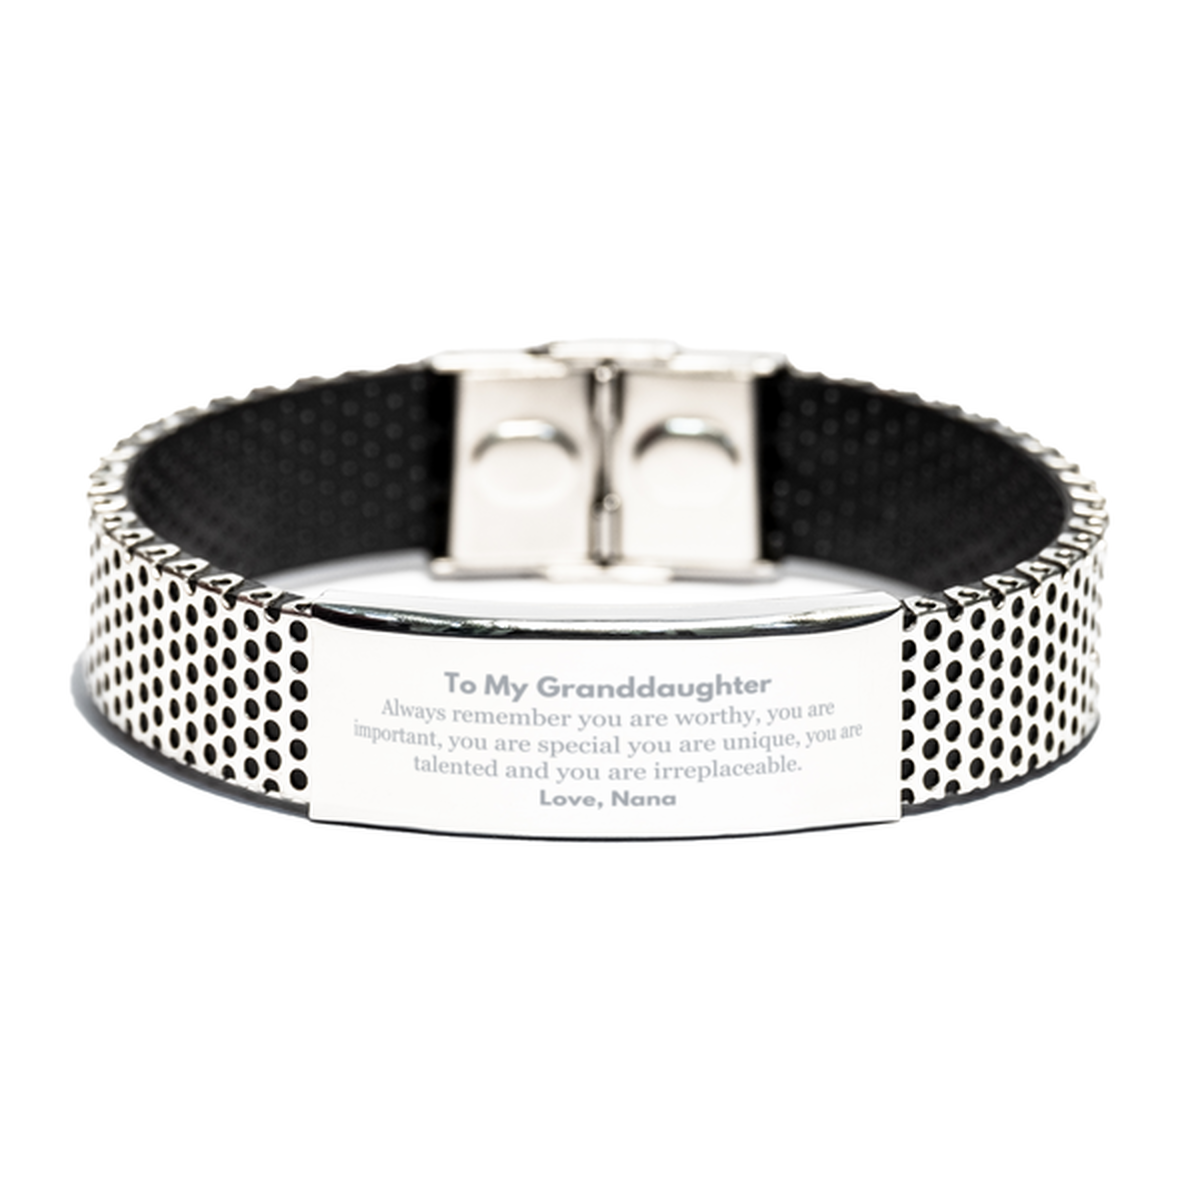 Granddaughter Birthday Gifts from Nana, Inspirational Stainless Steel Bracelet for Granddaughter Christmas Graduation Gifts for Granddaughter Always remember you are worthy, you are important. Love, Nana